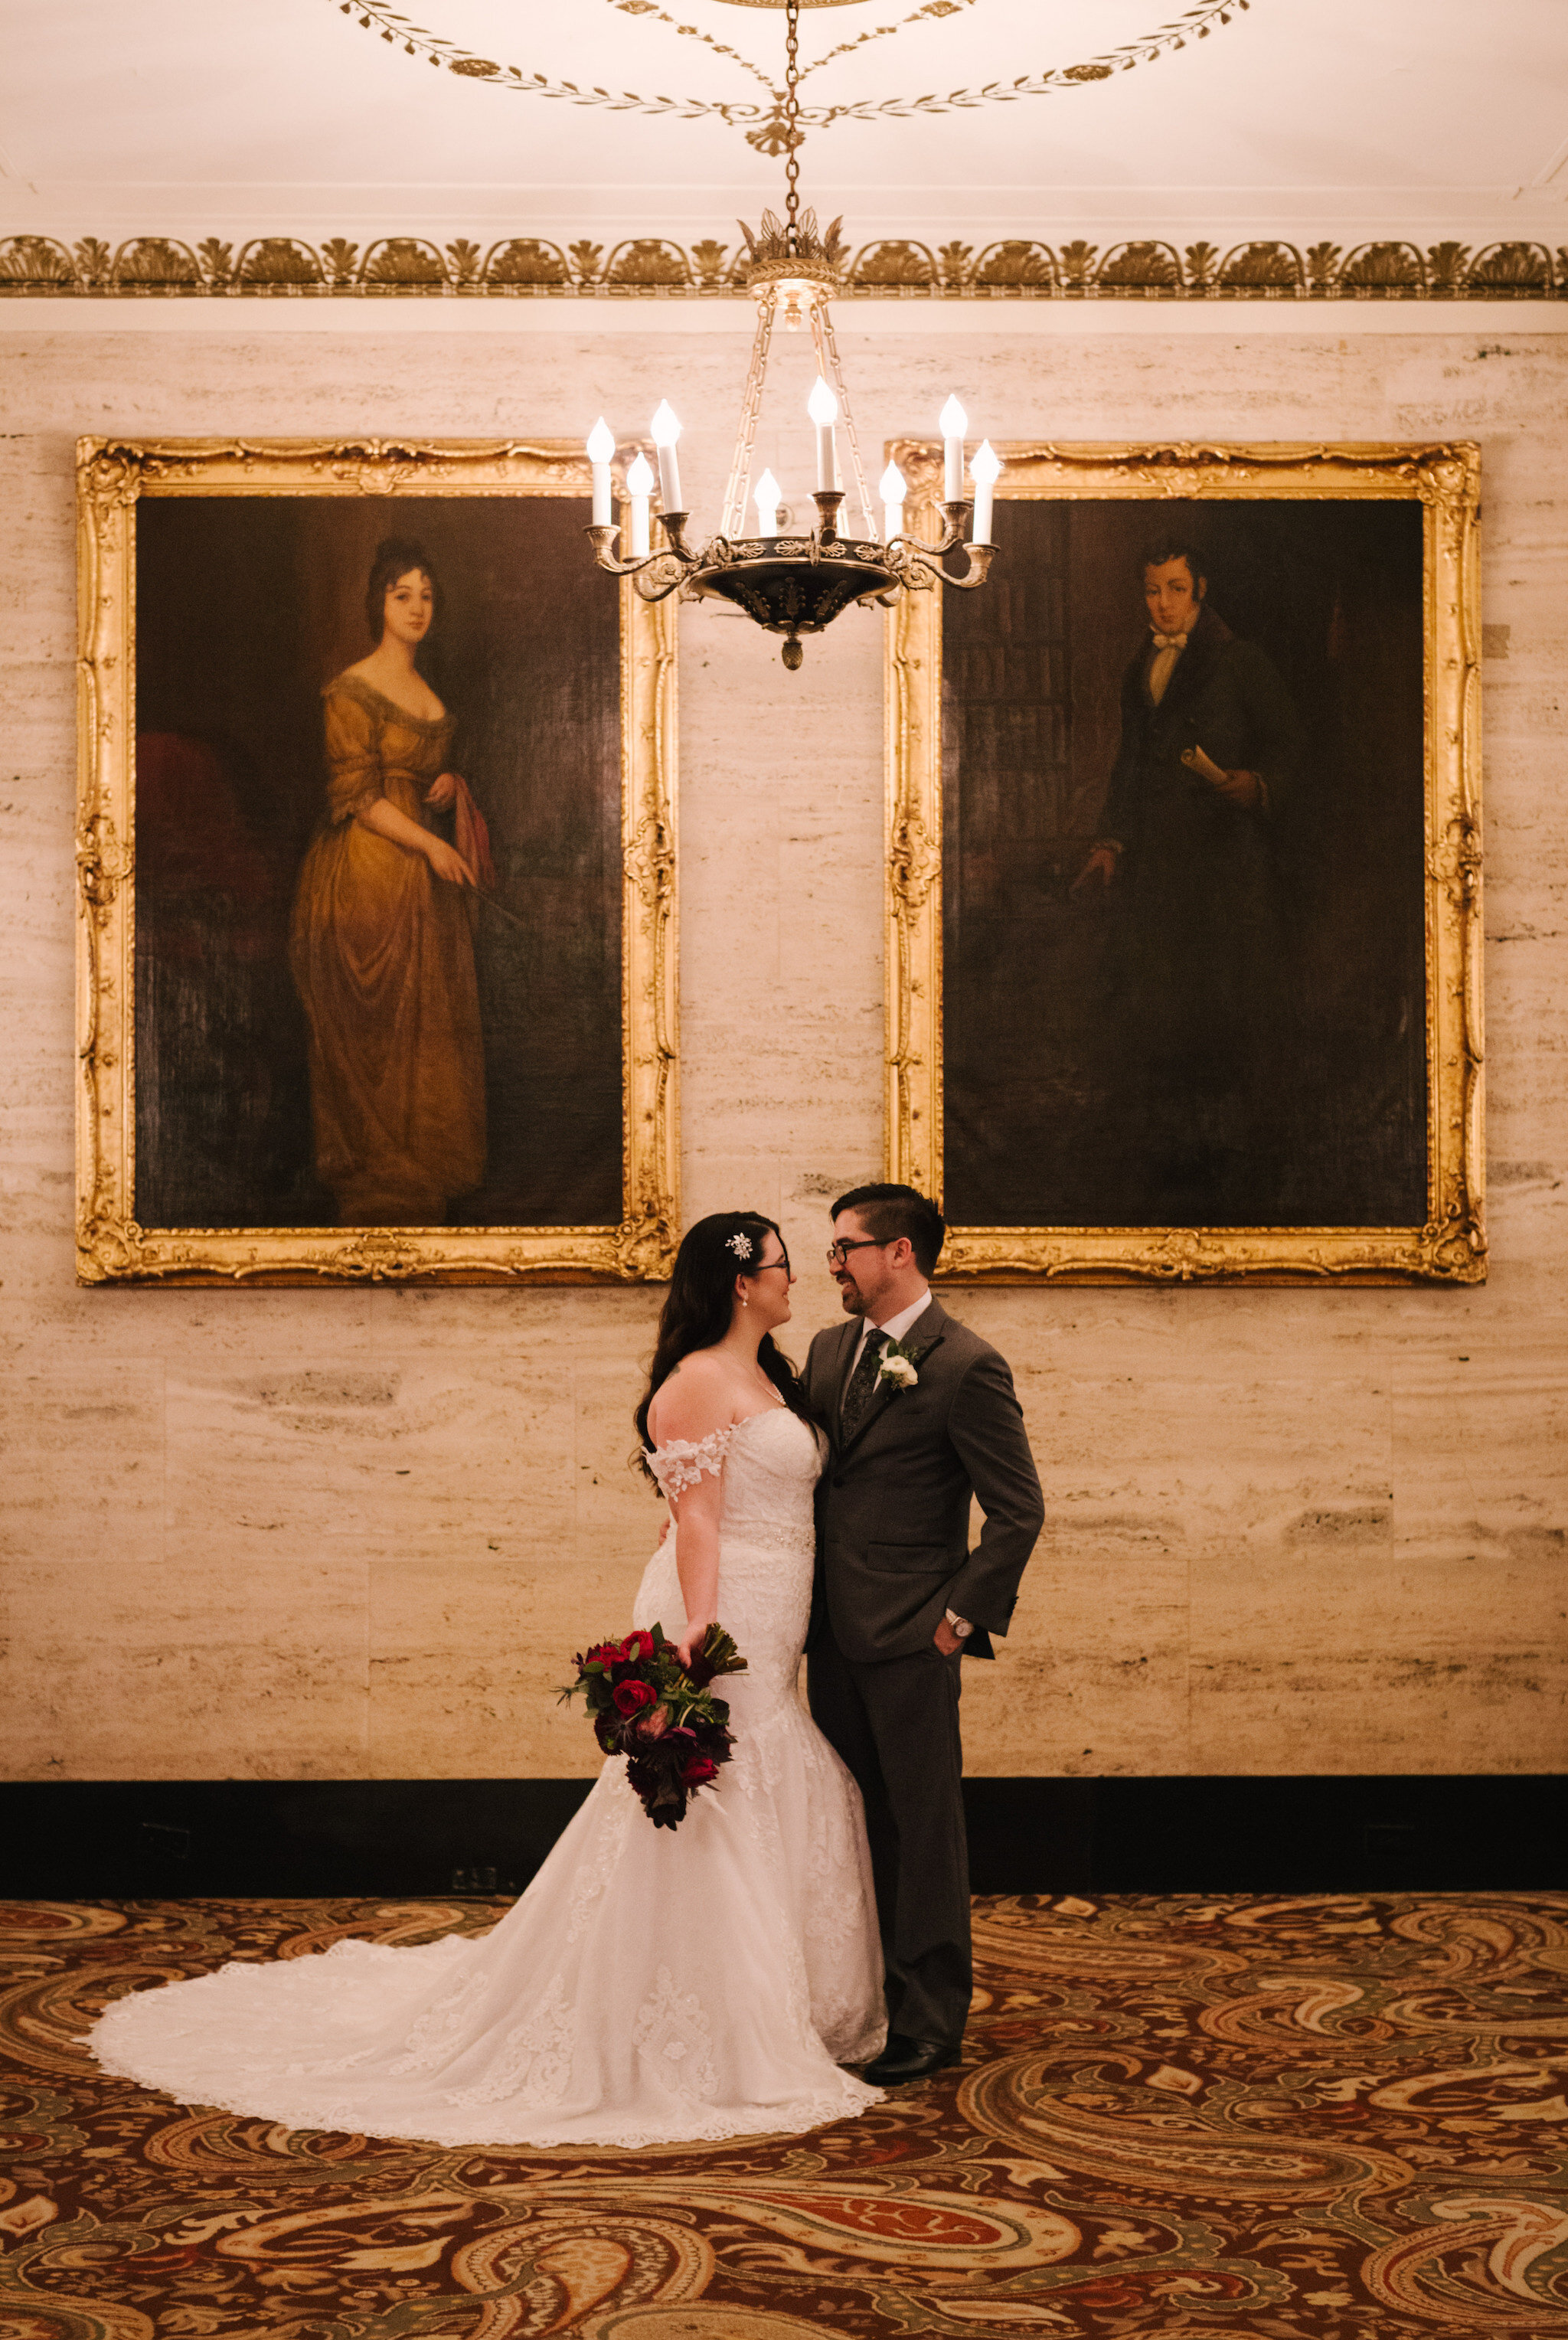 Elegant Jewel-Toned Wedding captured by Dorey Kronick featured on CHI thee WED